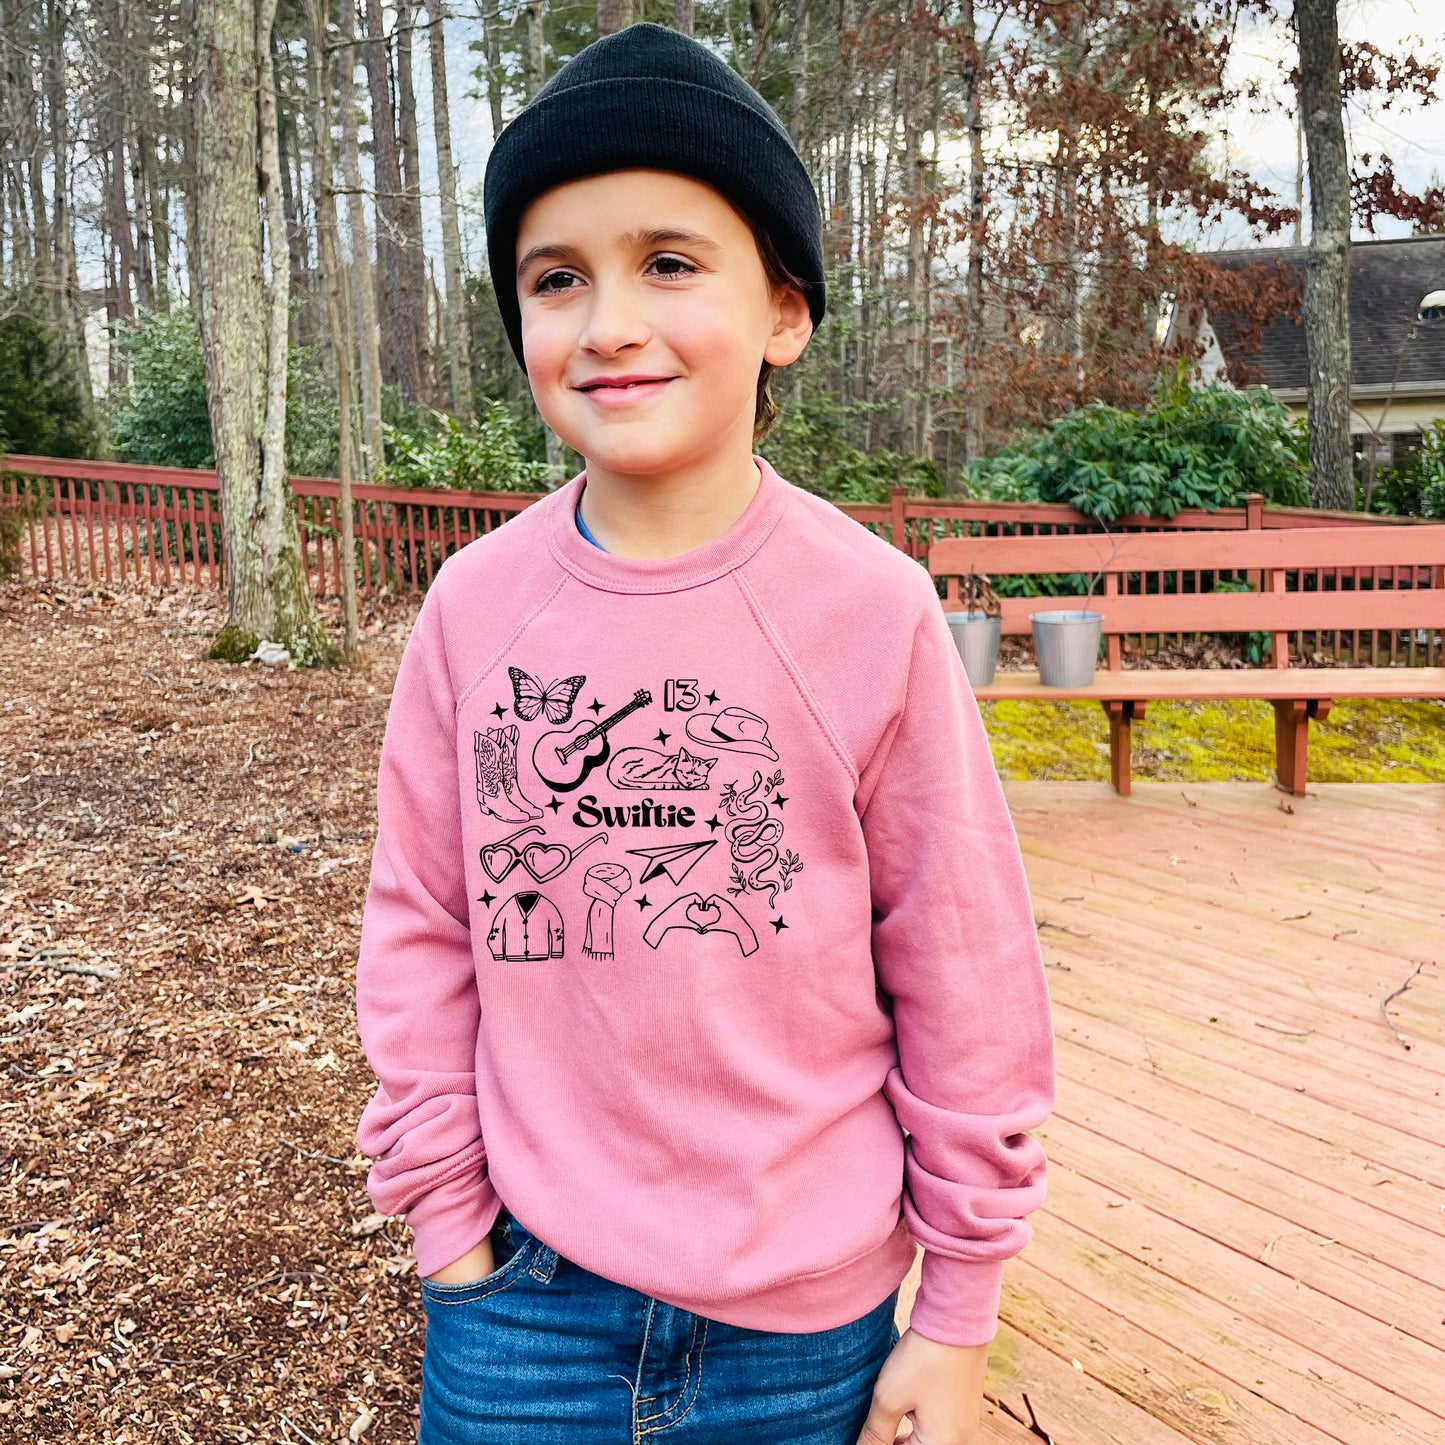 a young boy standing on a deck wearing a pink sweater